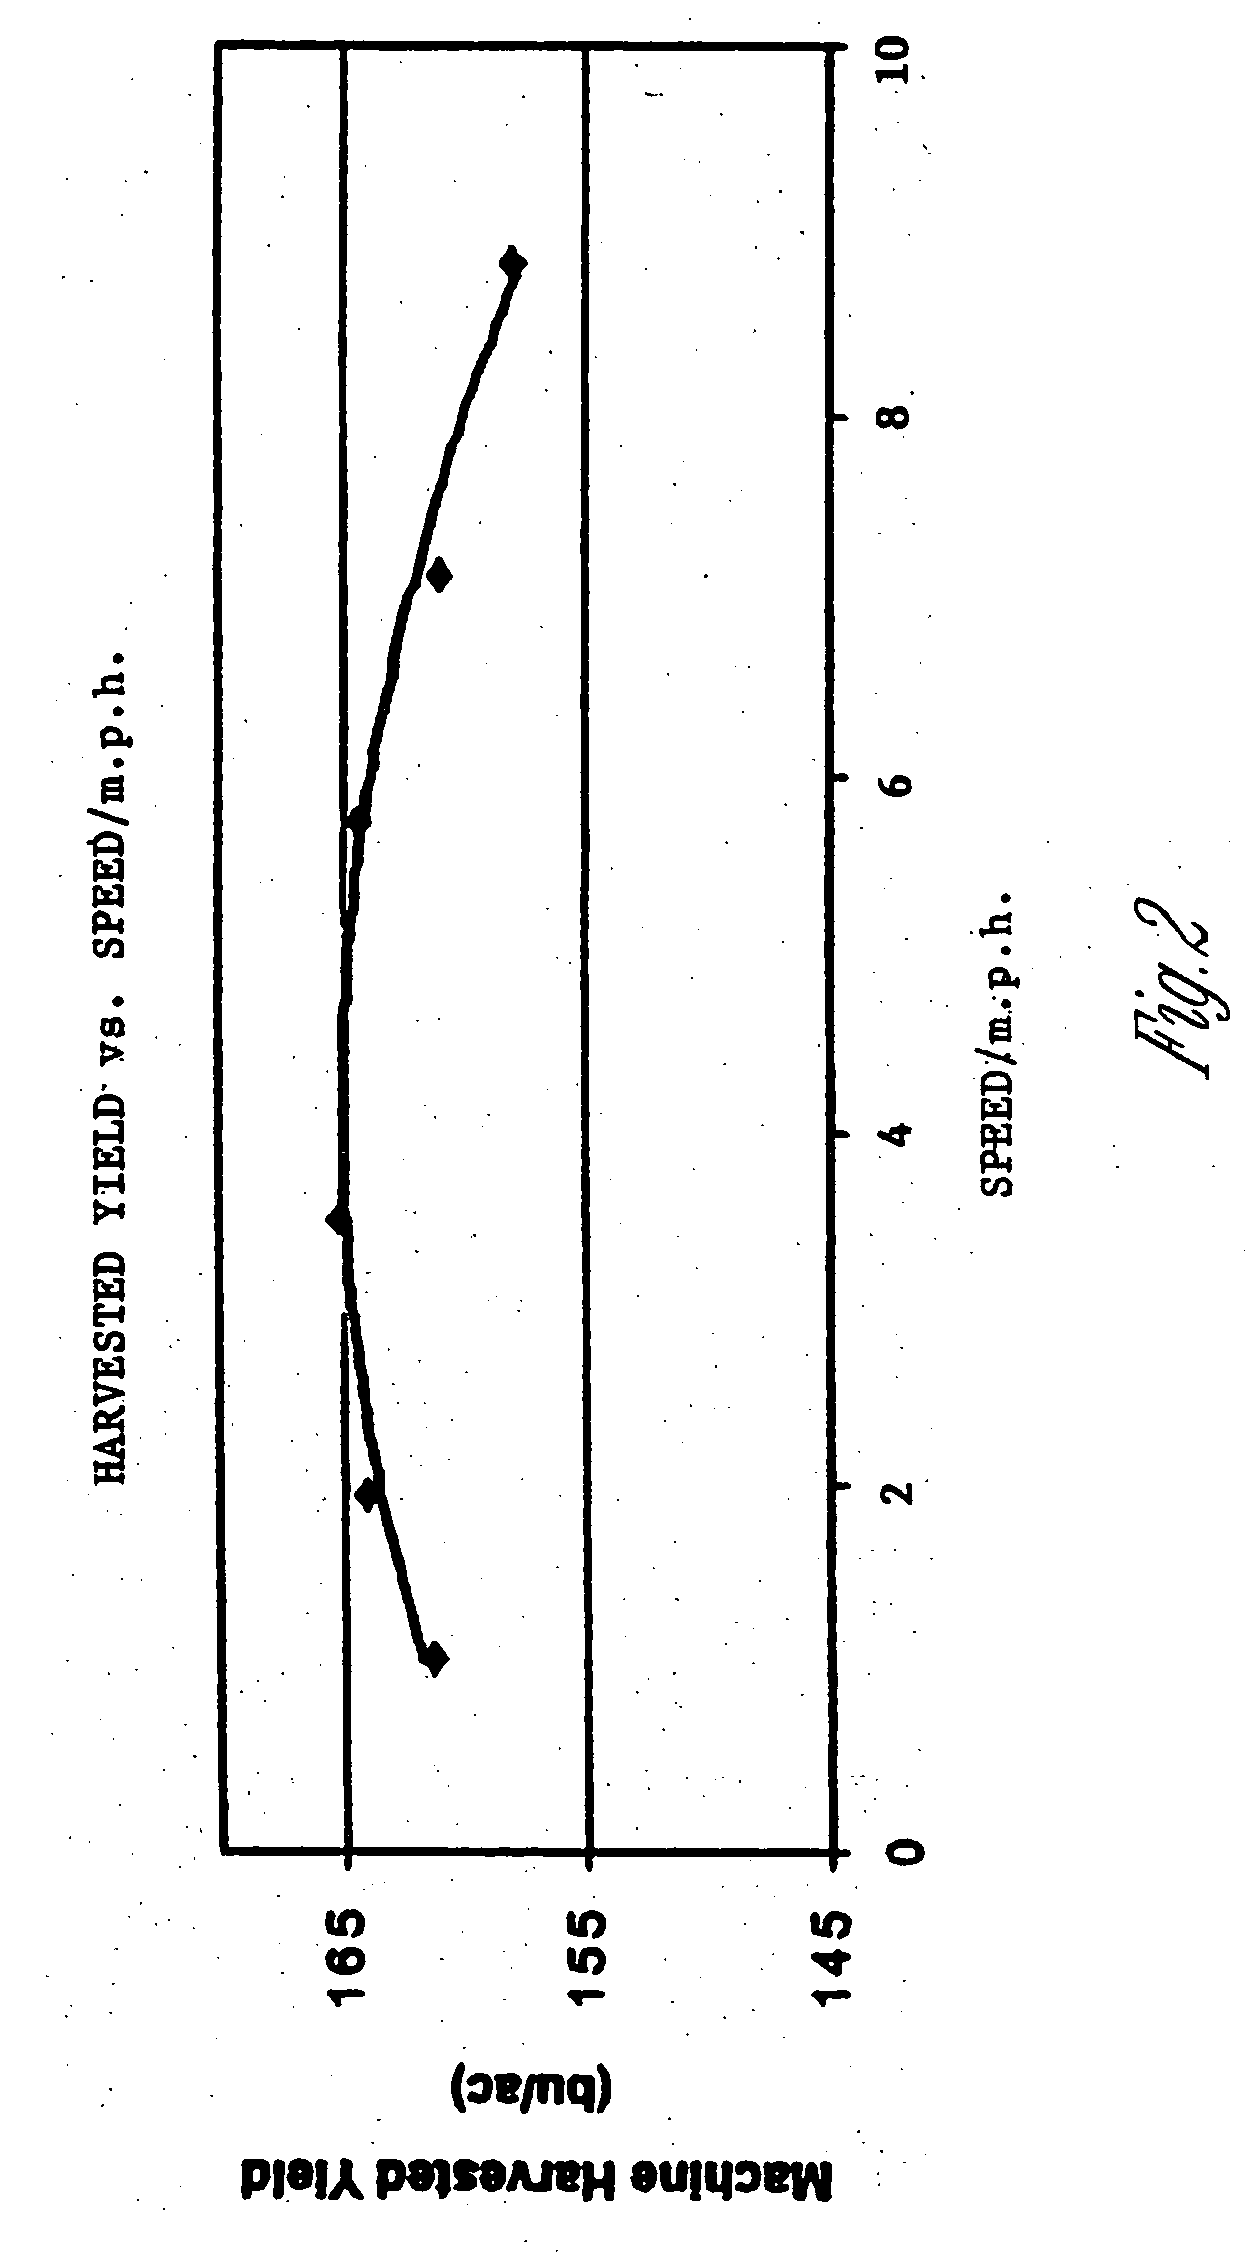 Apparatus and method for monitoring and controlling an agricultural harvesting machine to enhance the economic harvesting performance thereof